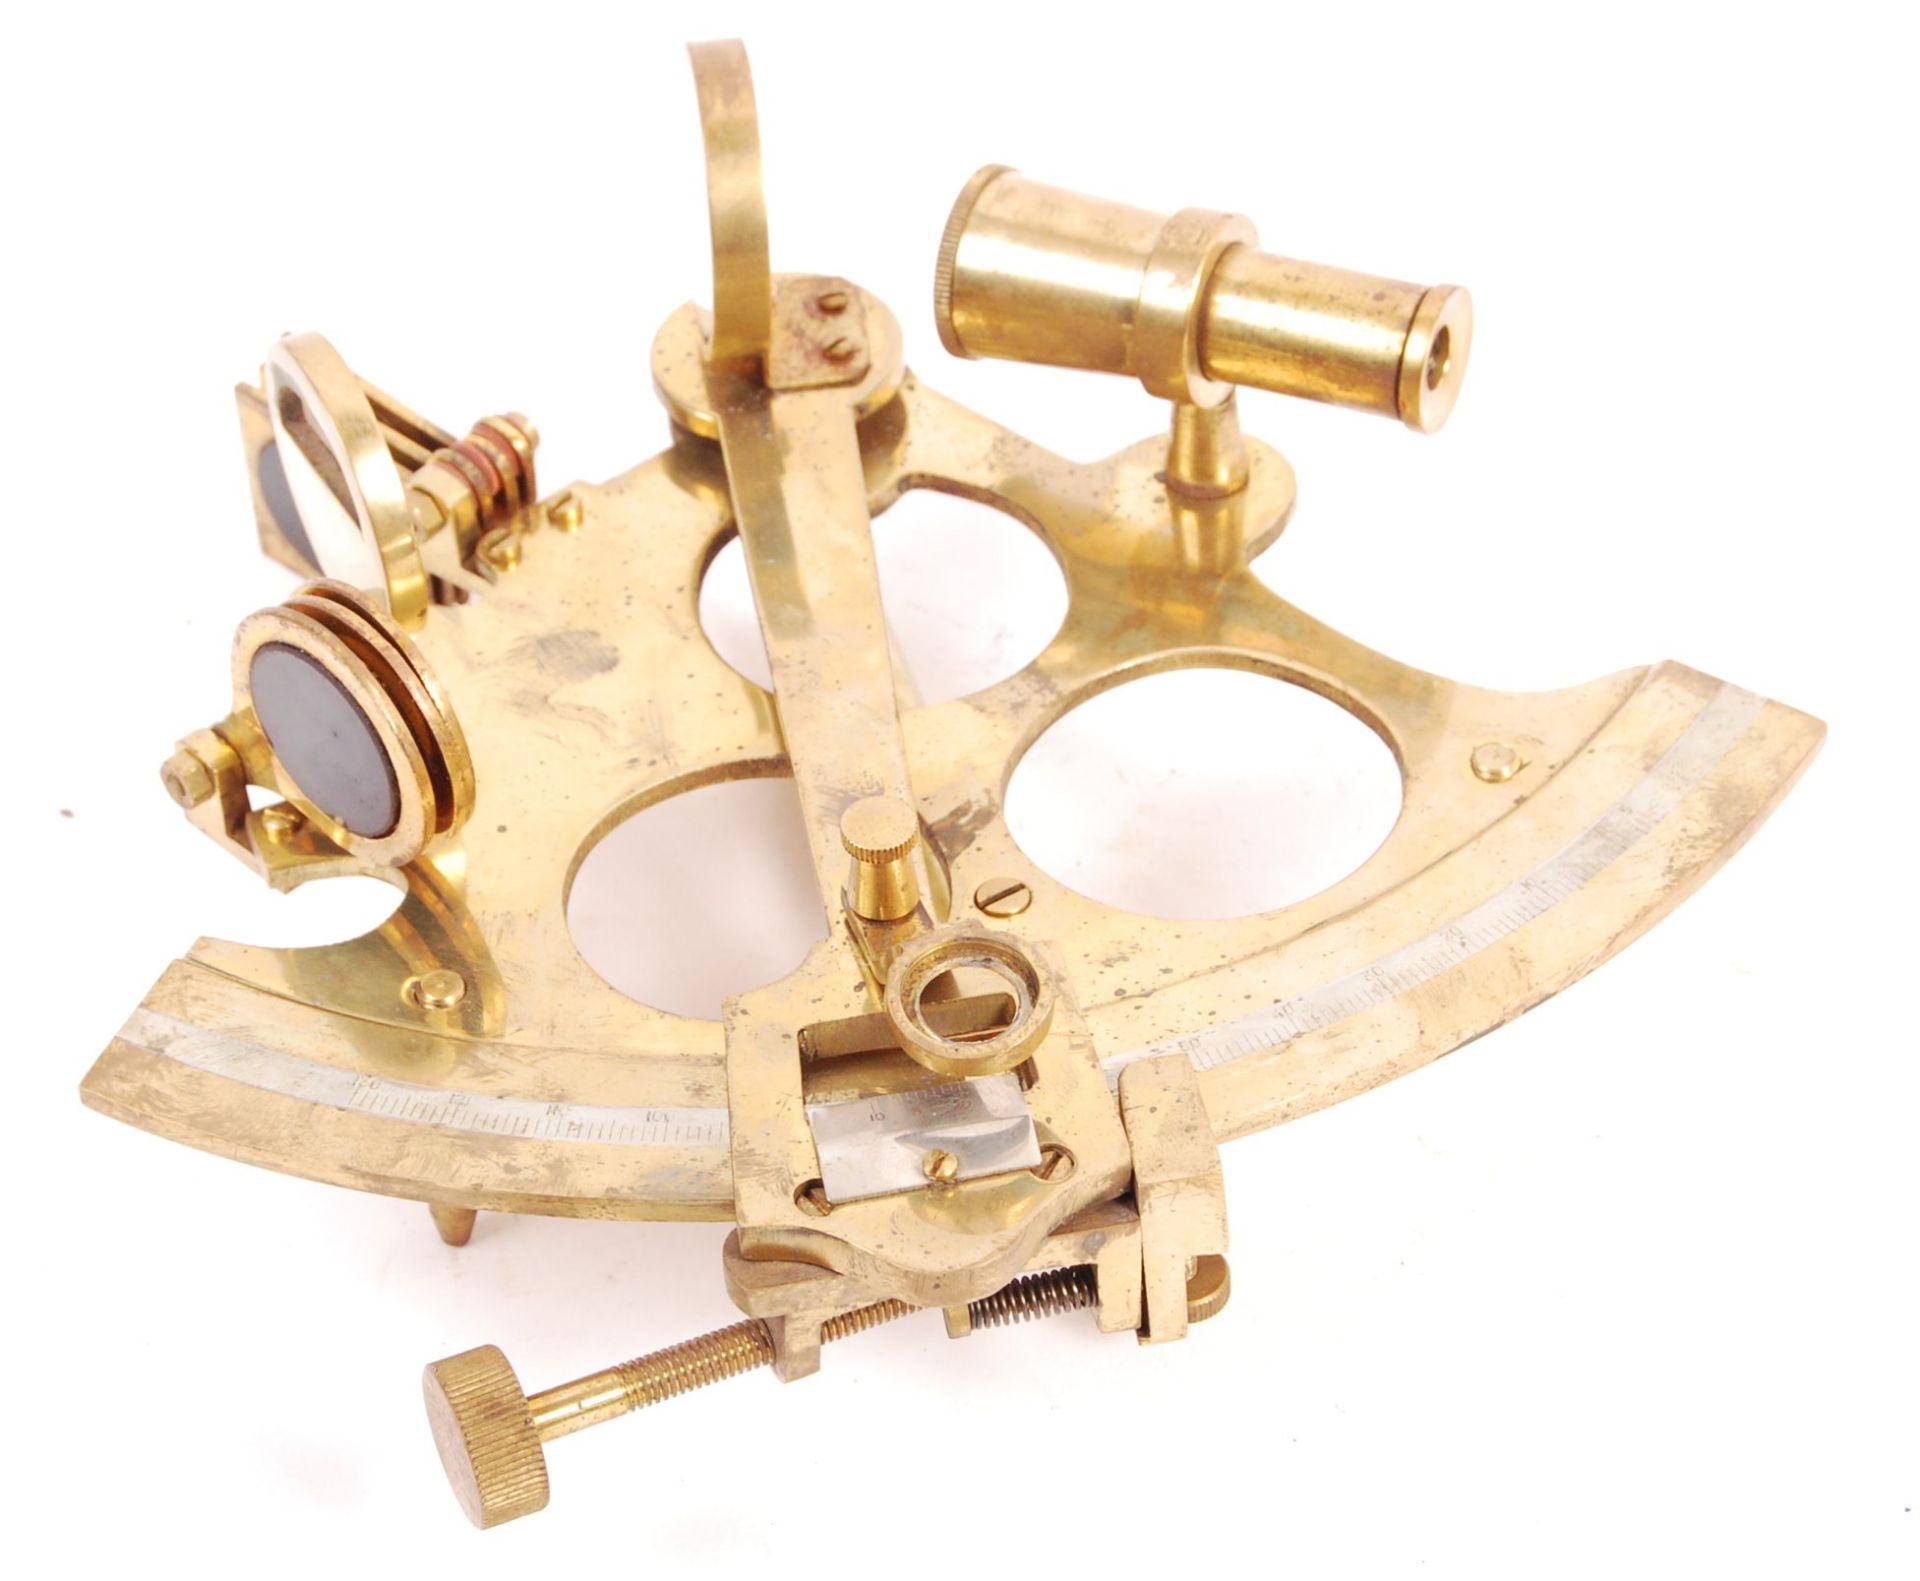 20TH CENTURY MILITARY BRASS NAVIGATIONAL SEXTANT INSTRUMENT - Image 2 of 3